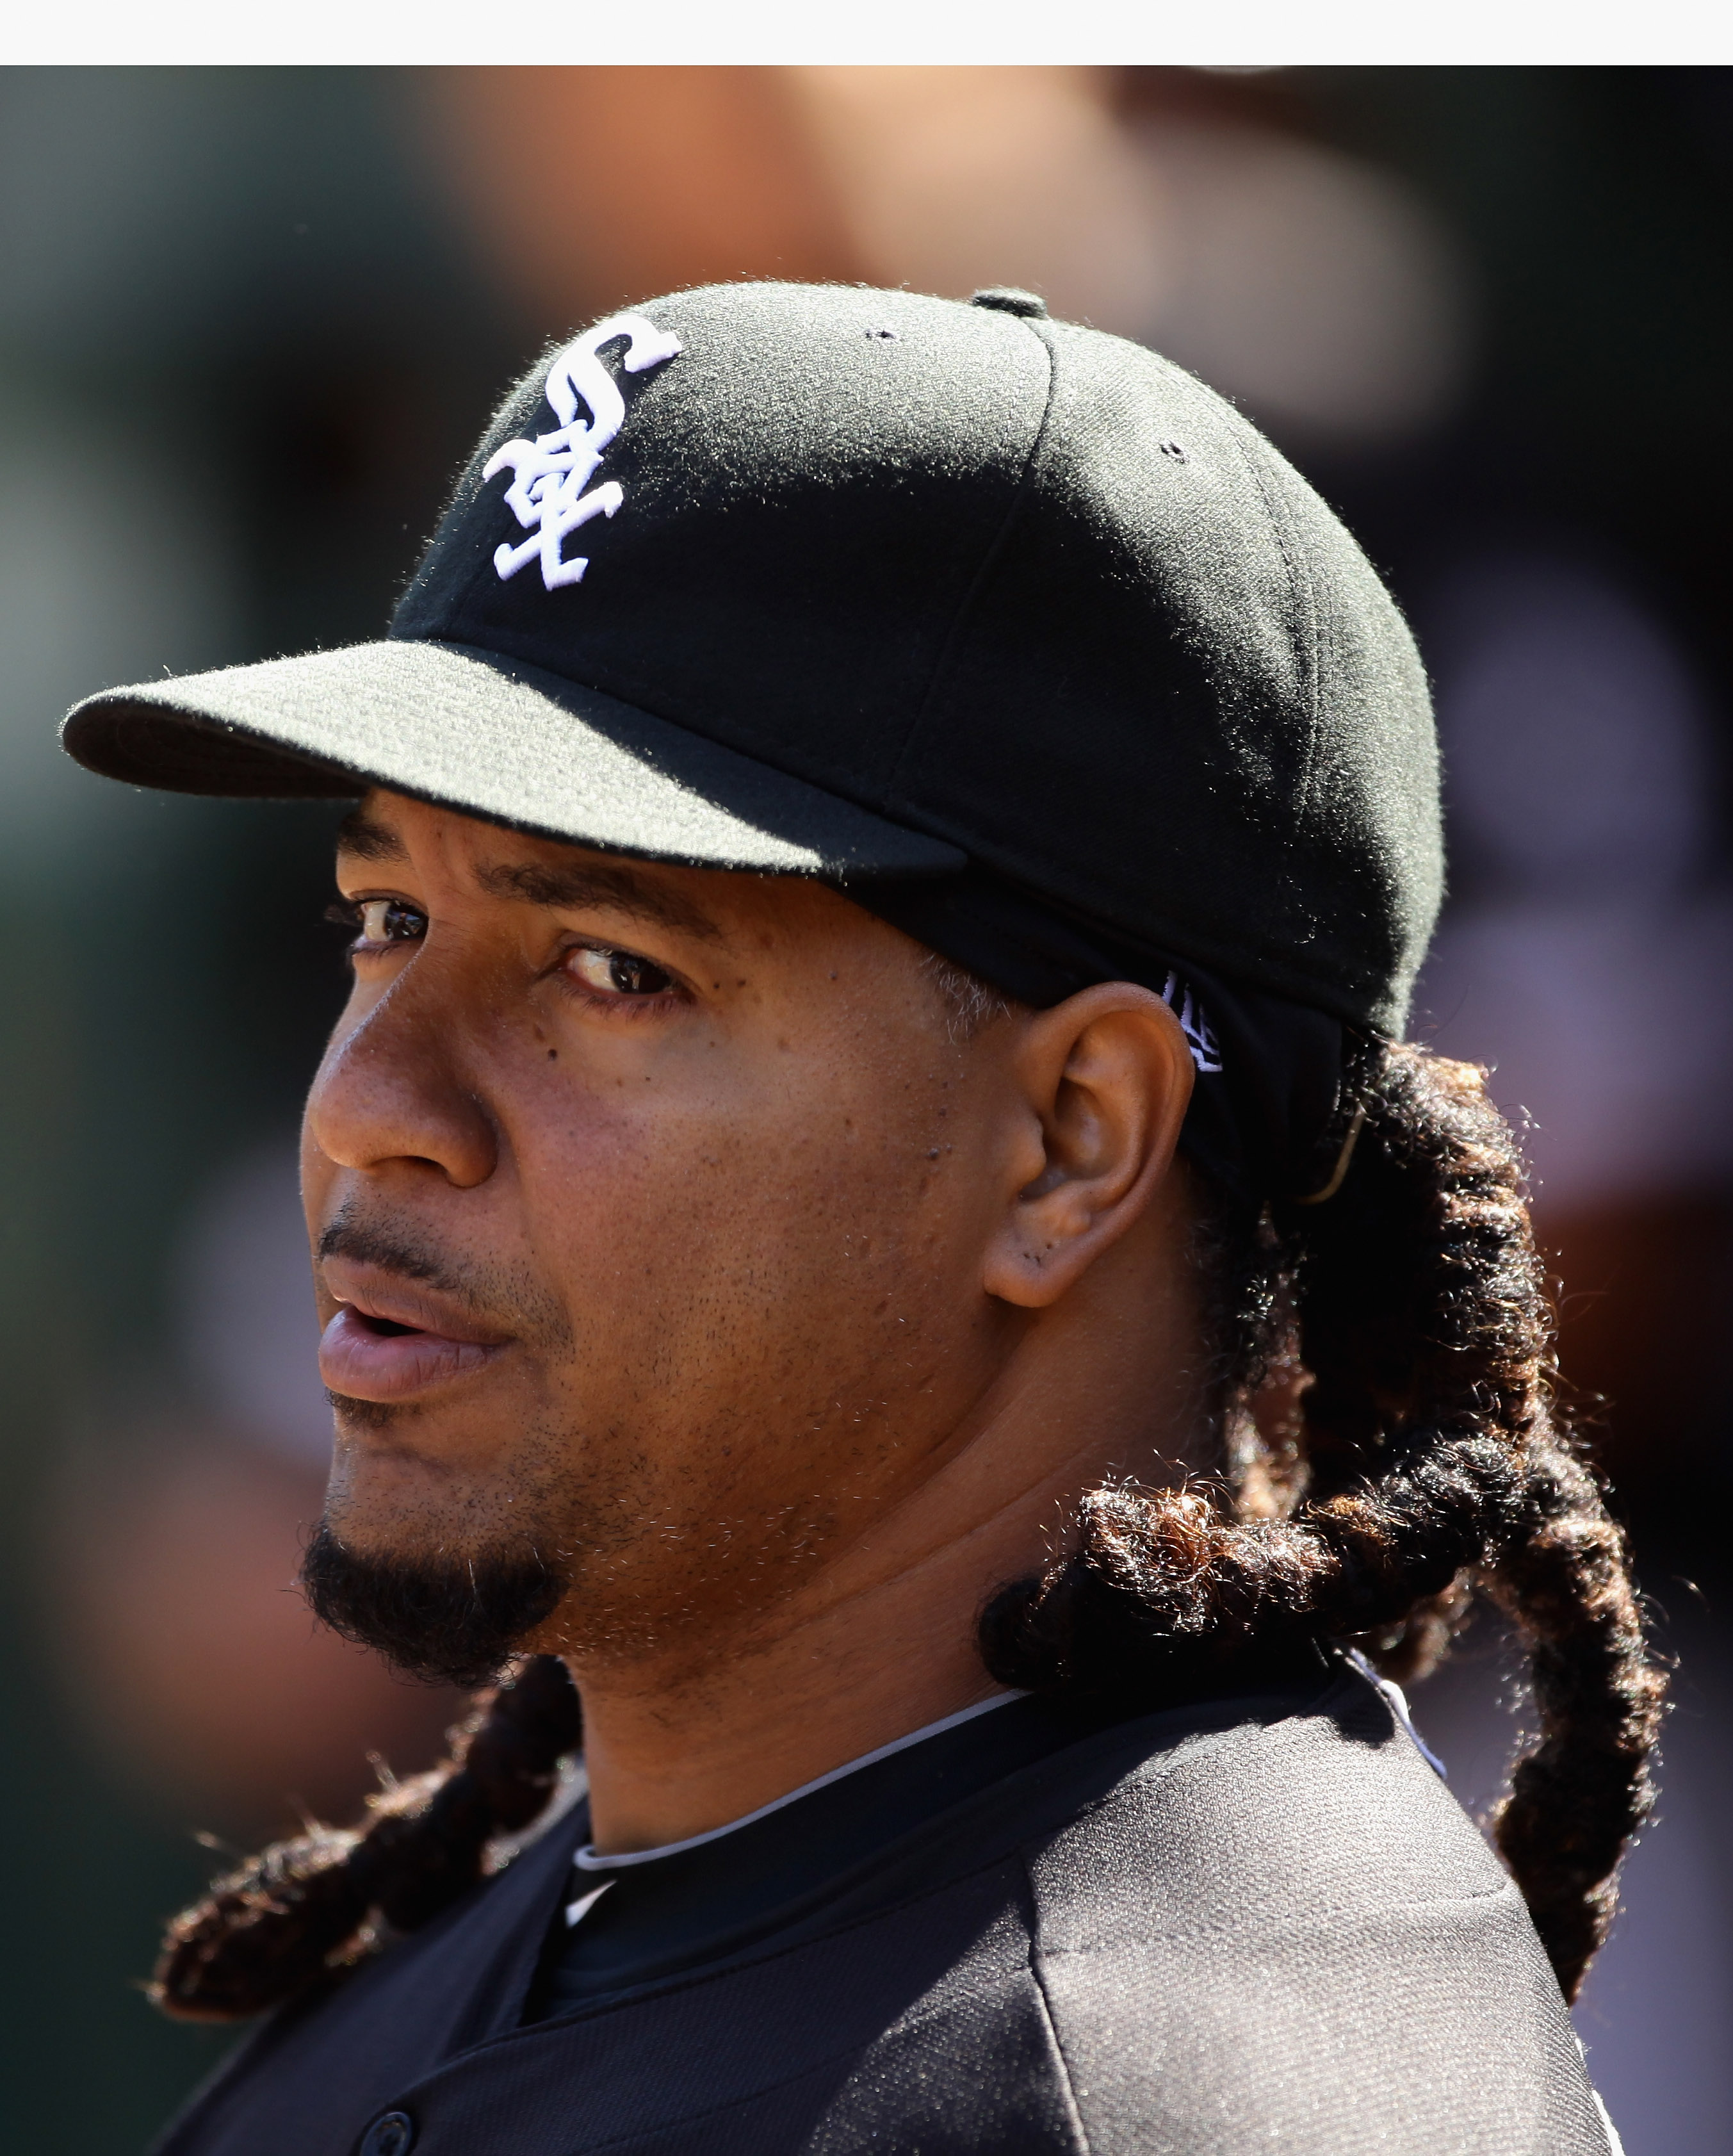 OAKLAND, CA - SEPTEMBER 22:  Manny Ramirez #99 of the Chicago White Sox stands in the dugout before their game against the Oakland Athletics at the Oakland-Alameda County Coliseum on September 22, 2010 in Oakland, California.  (Photo by Ezra Shaw/Getty Im